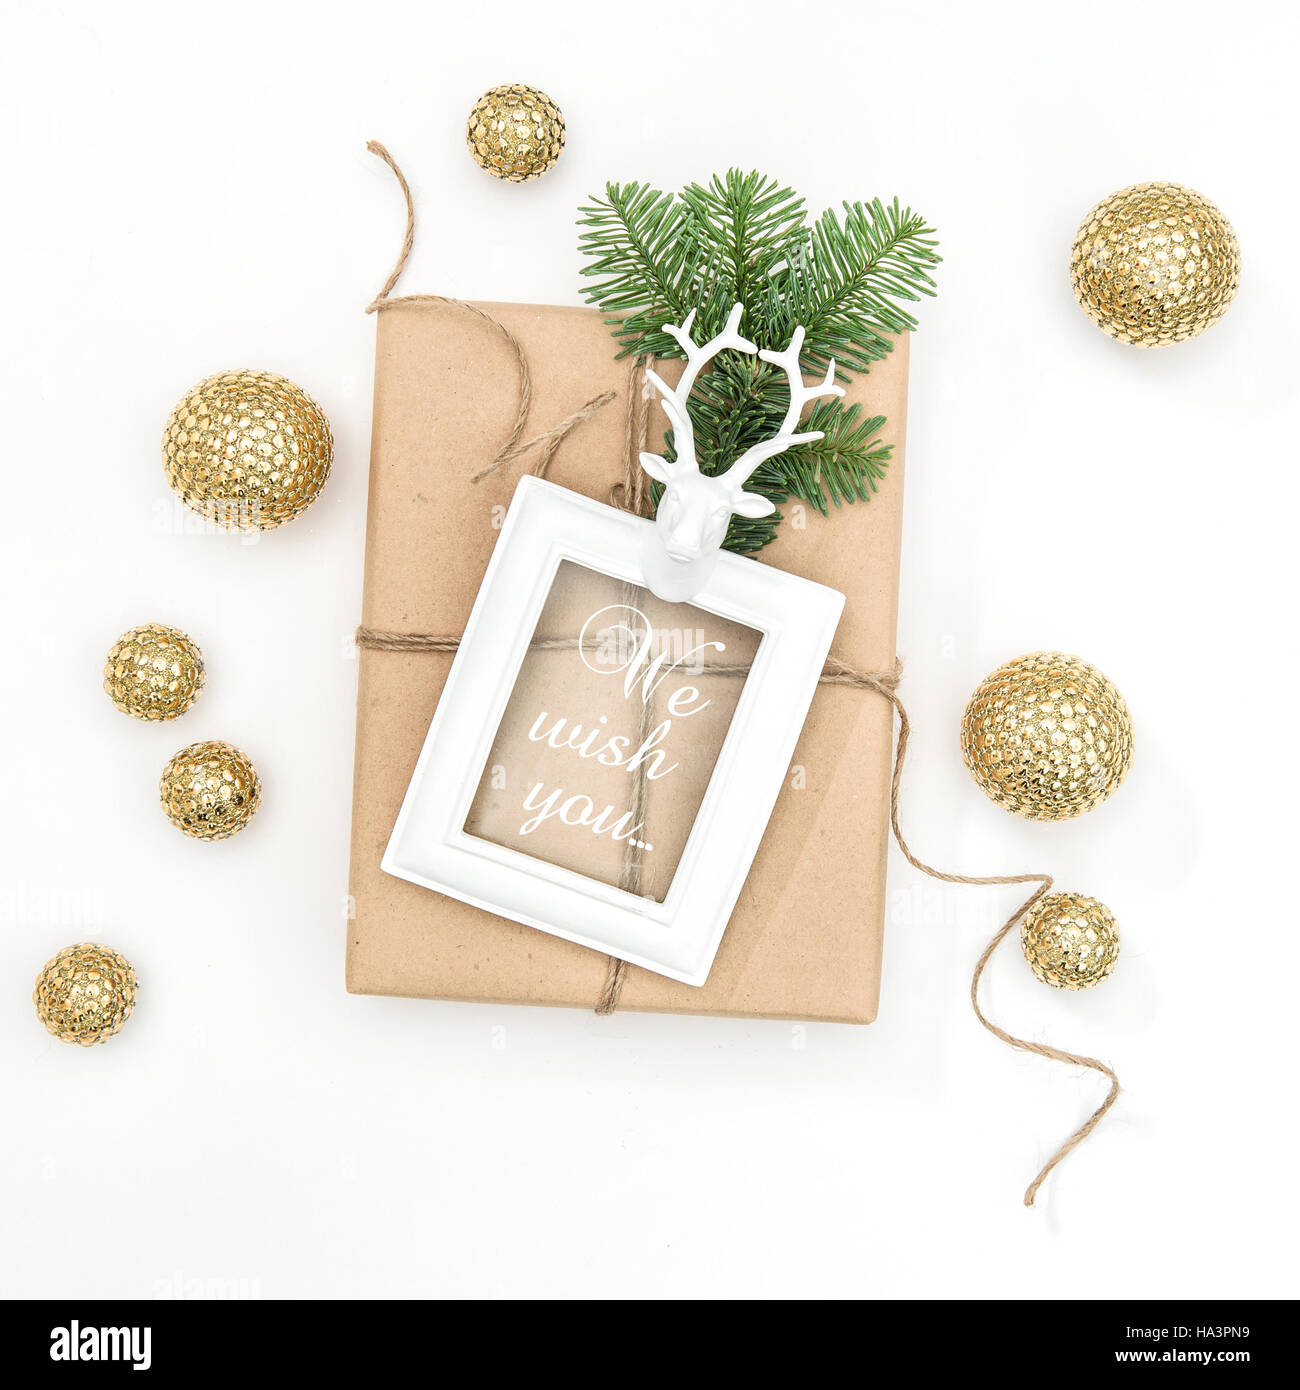 Christmas composition with gift, picture frame and golden decoration on white background. Square image perfect for social media Stock Photo